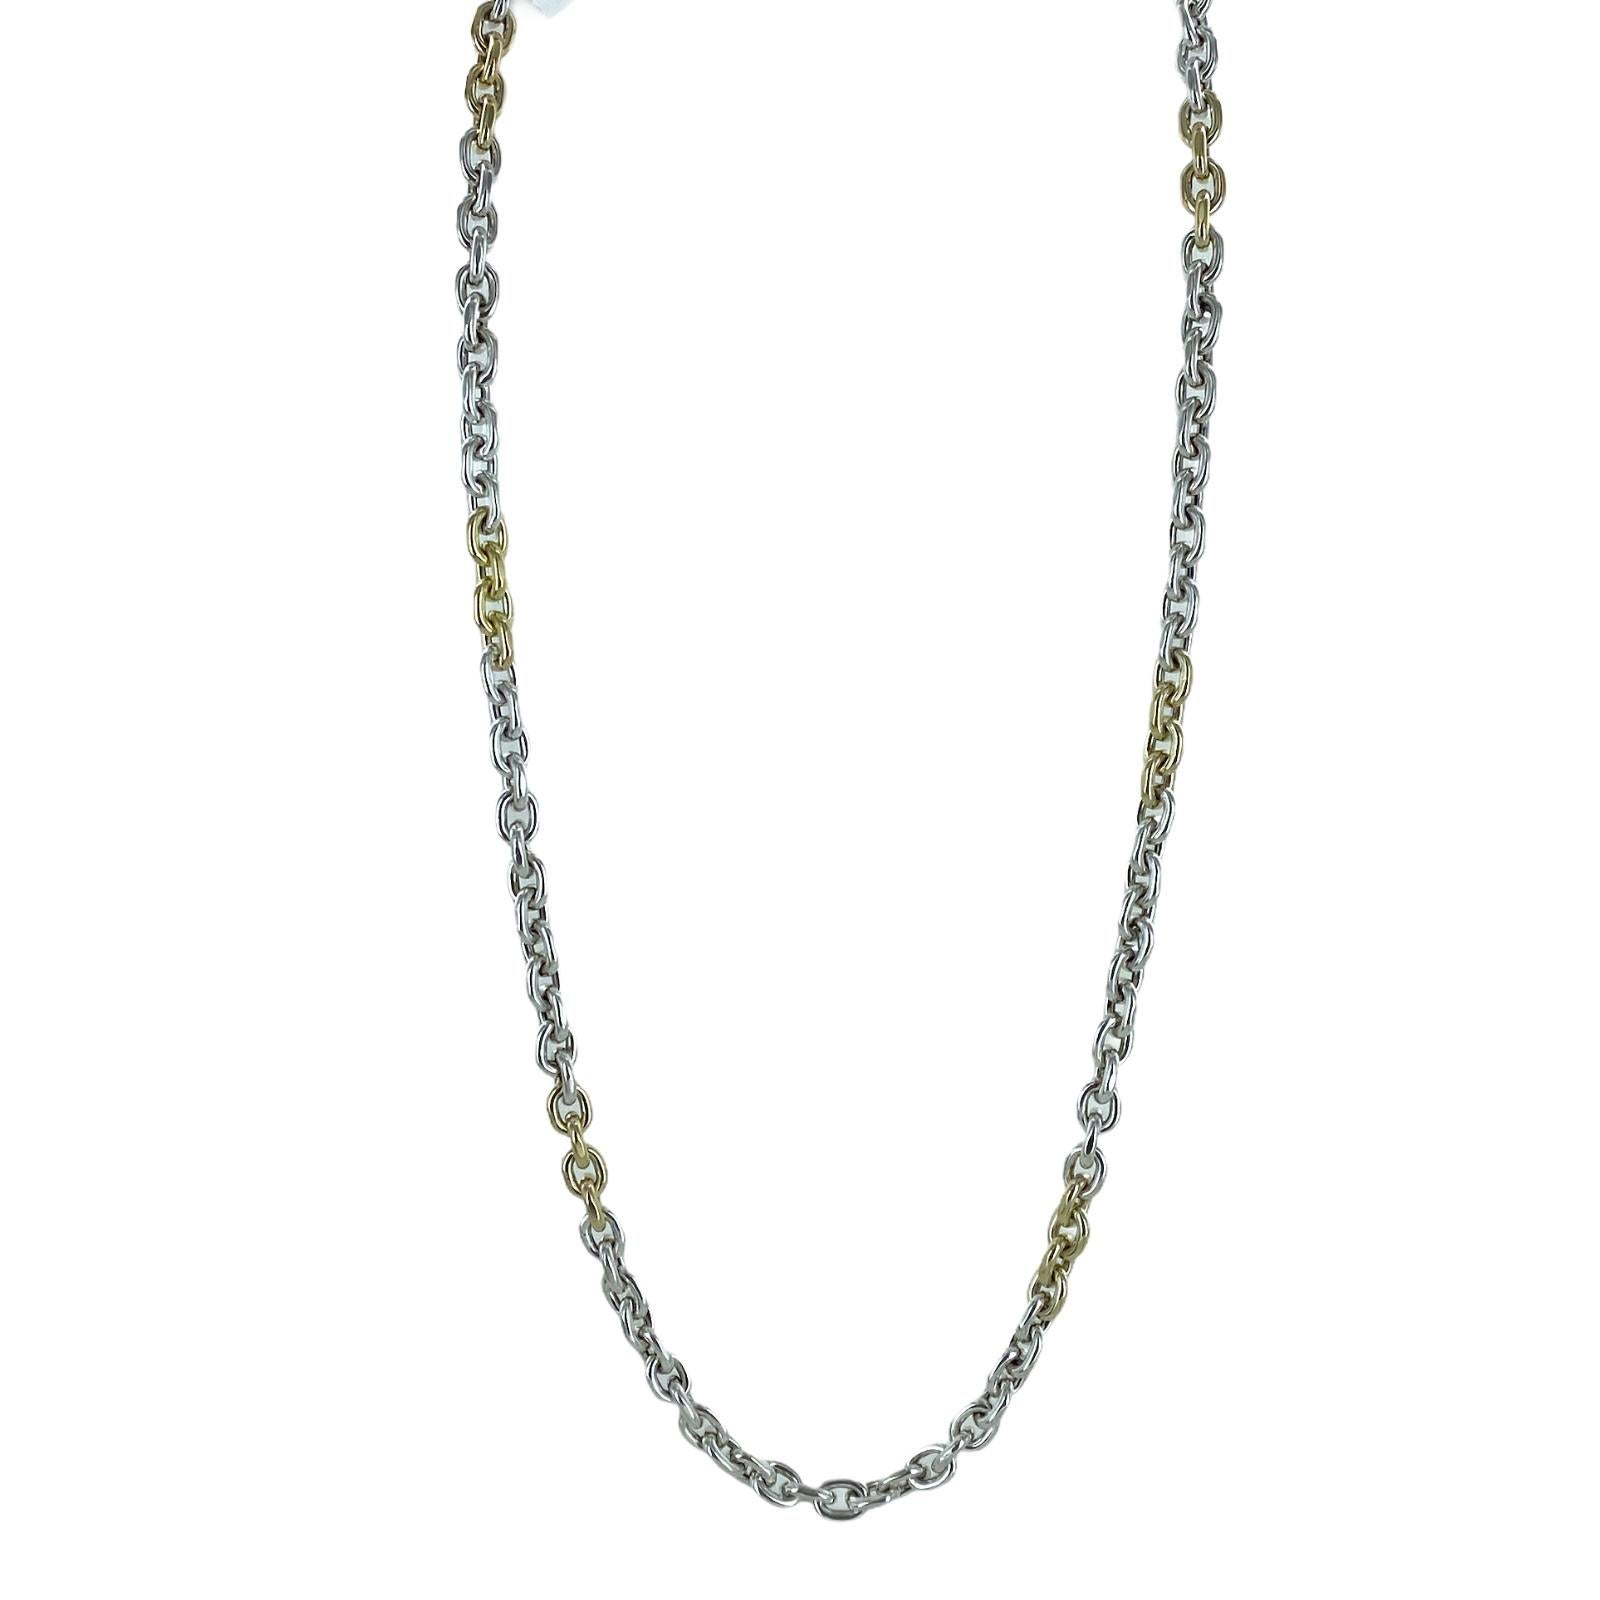 Oval link necklace fashioned in 18 karat yellow gold and sterling silver. The two tone link chain measures 24 inches in length. 